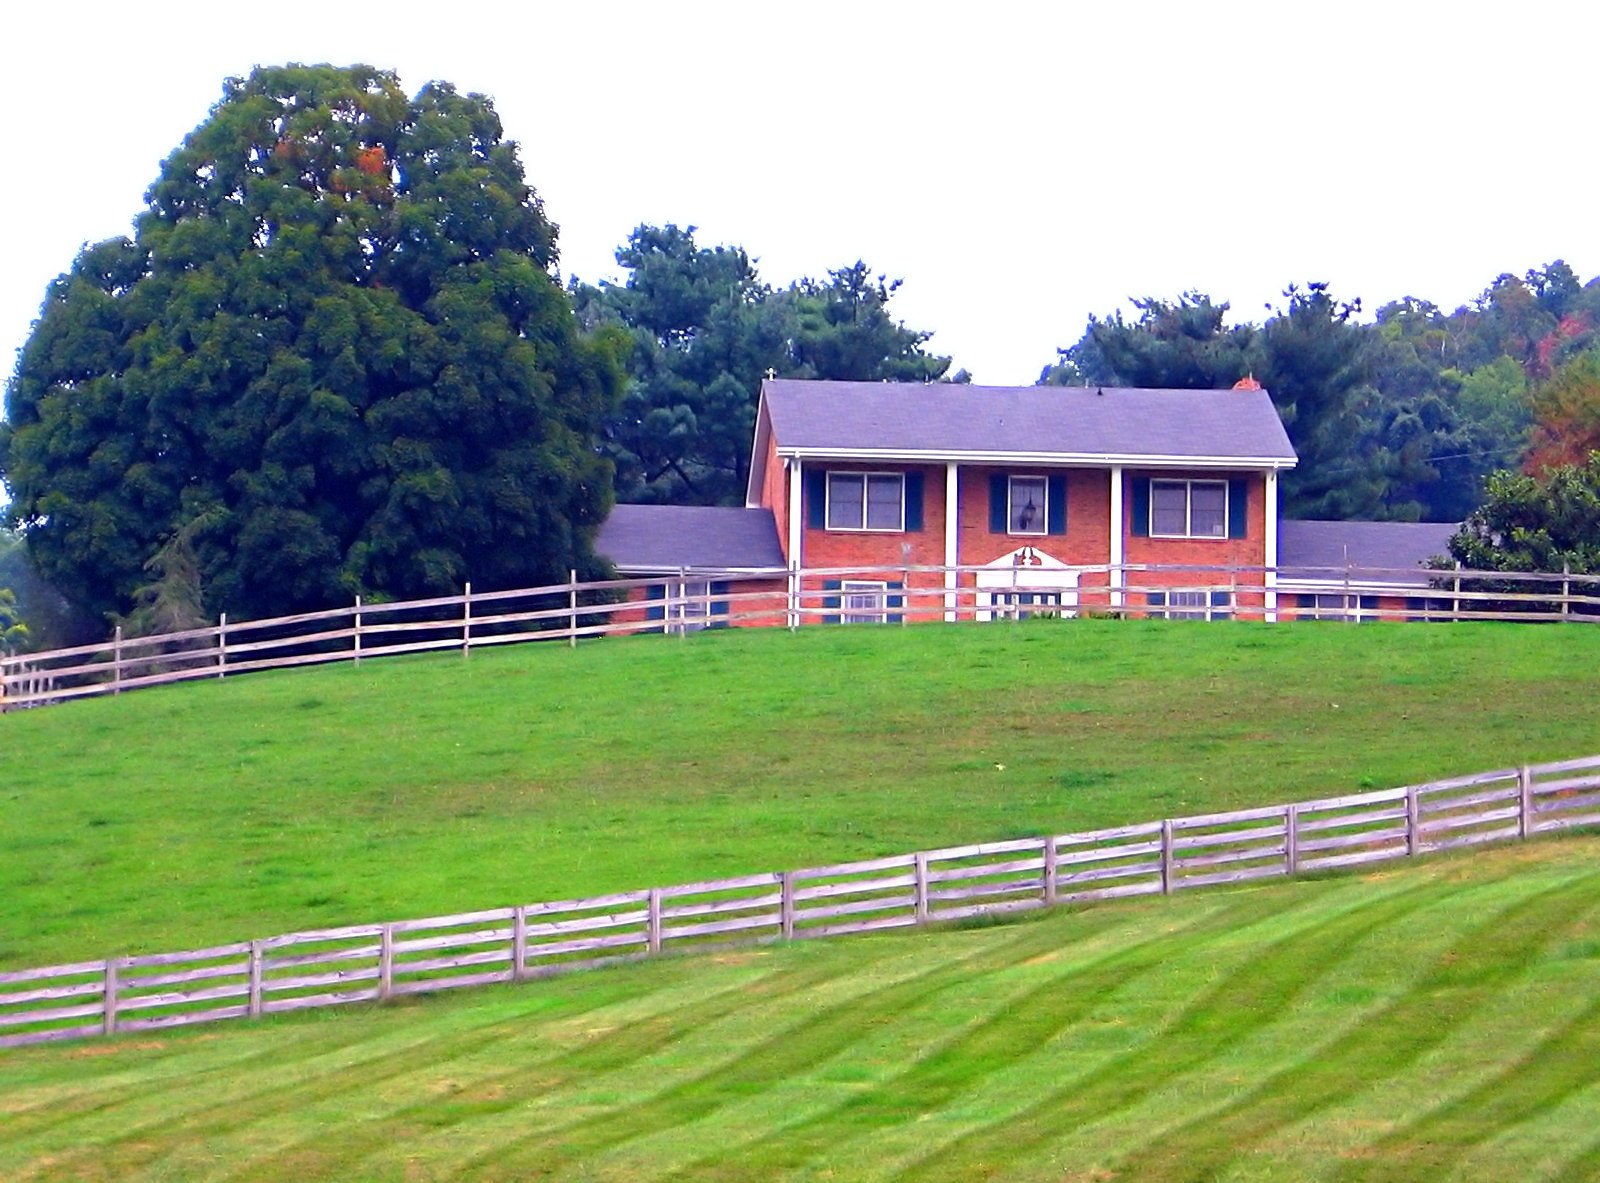 the view of a red brick ranch house in a pasture